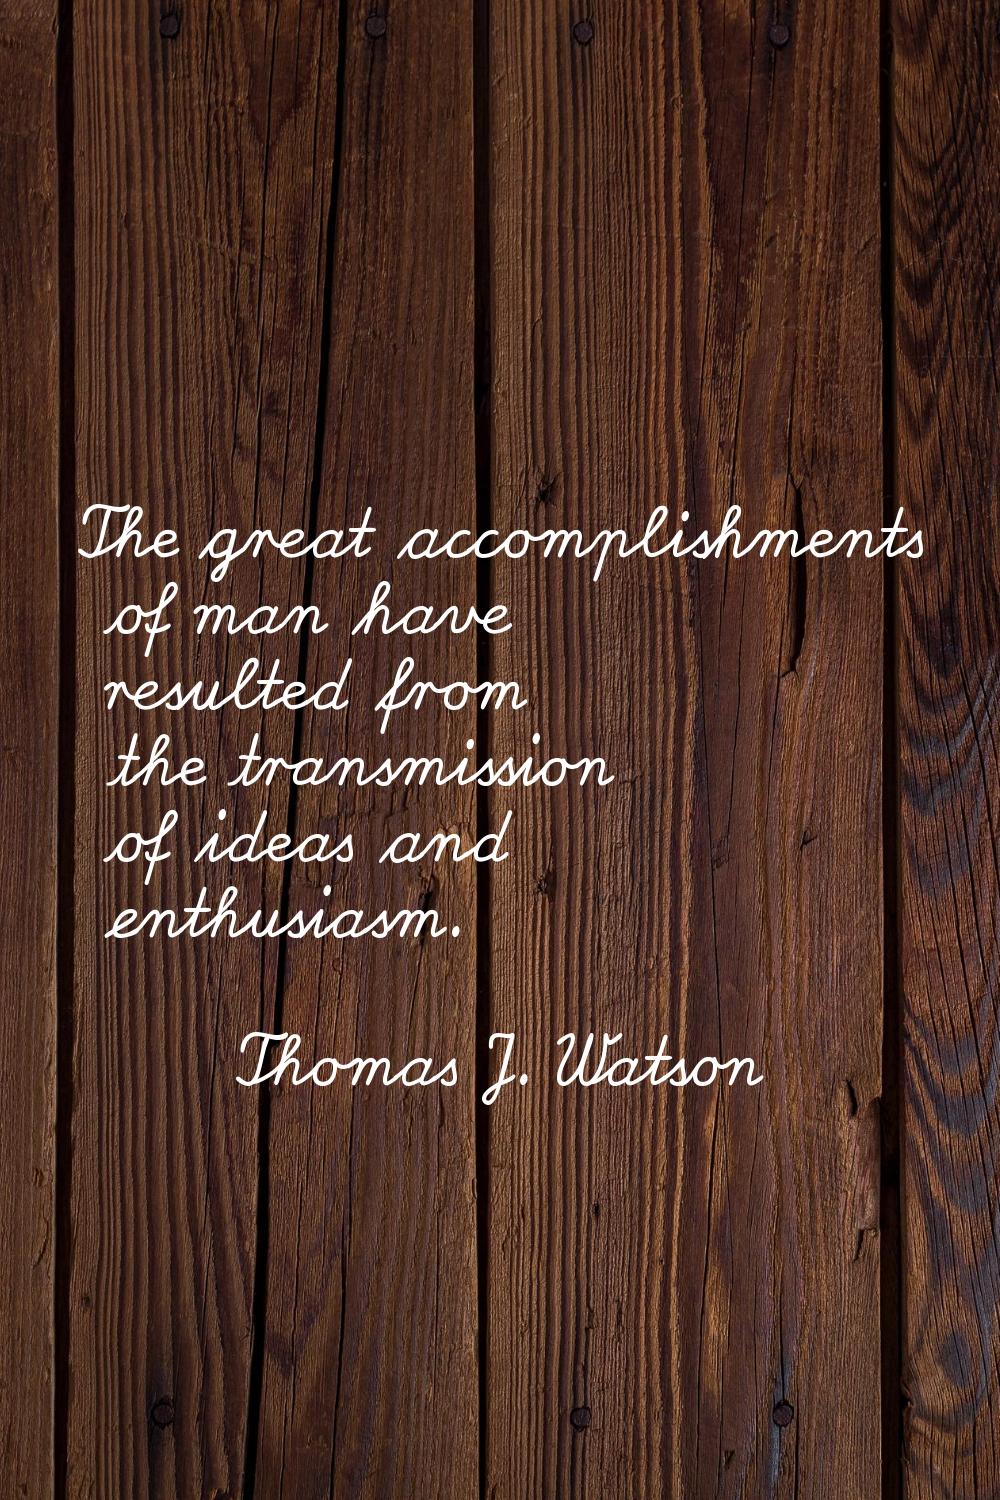 The great accomplishments of man have resulted from the transmission of ideas and enthusiasm.